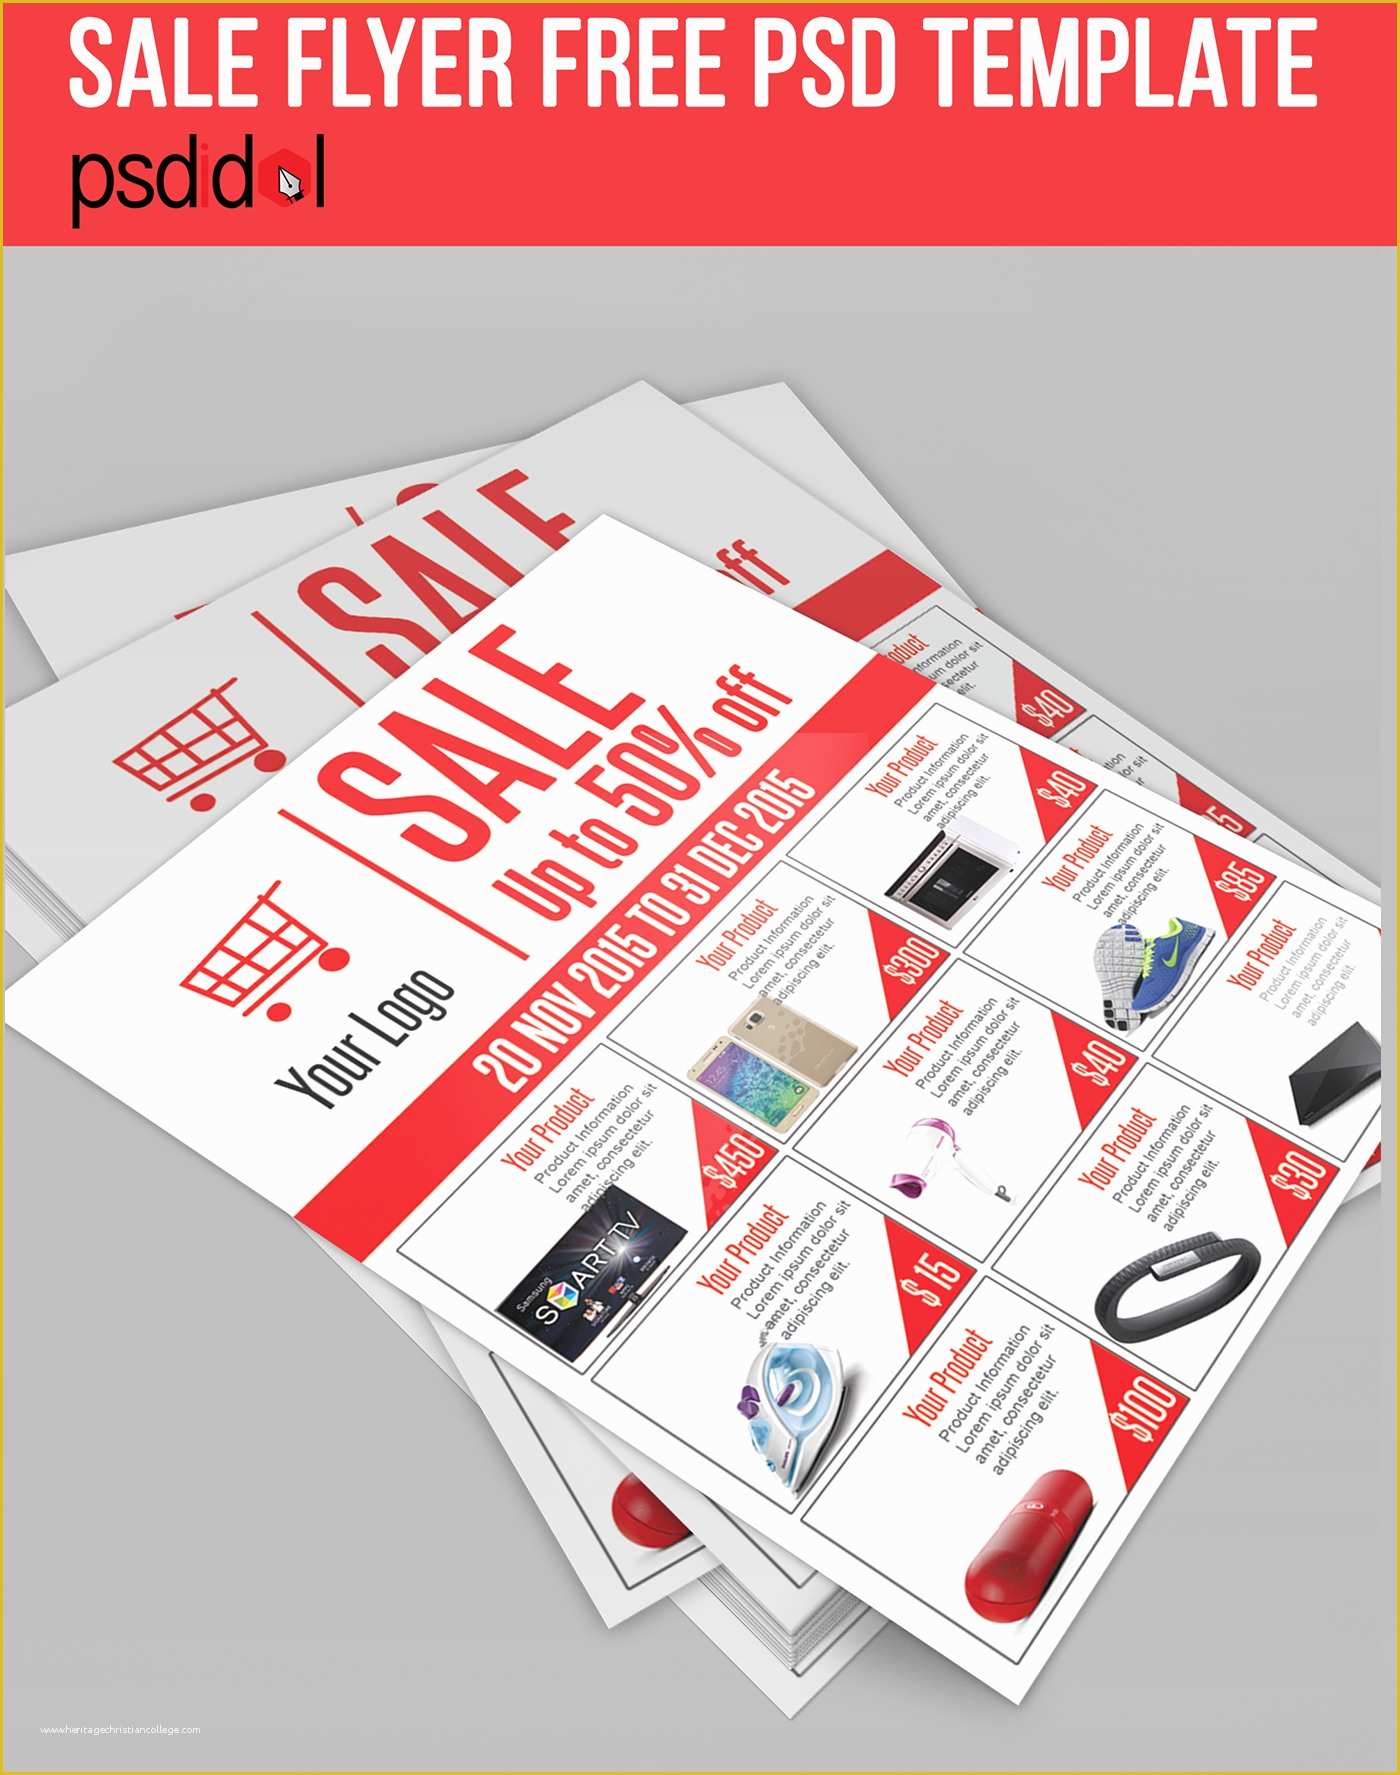 Free Photoshop Templates Of Sale Flyer Free Psd Template Download On Behance